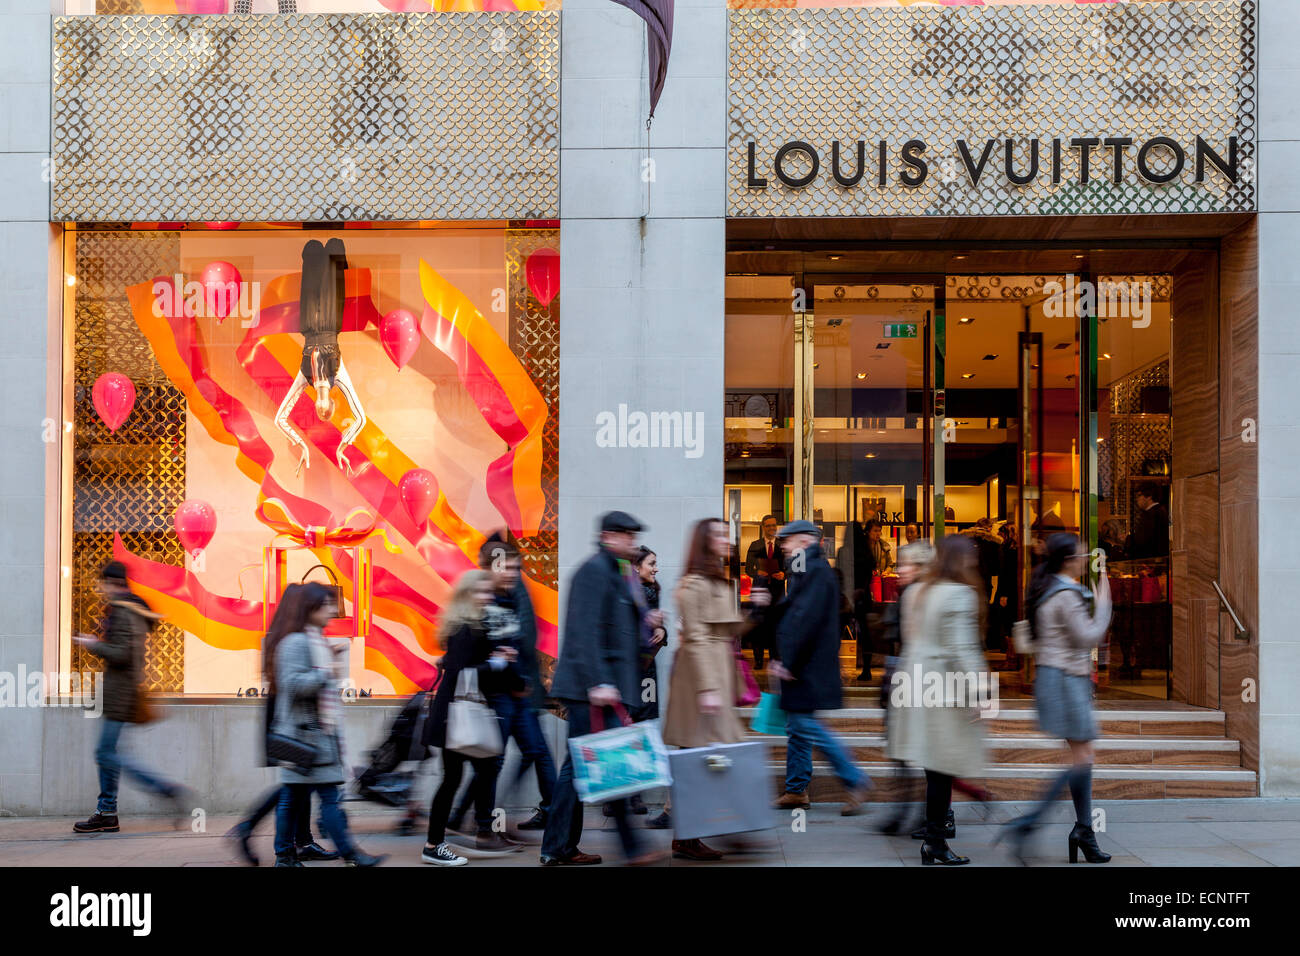 Sneakers LV archlight Louis Vuitton collection 2020. Woman with Louis  Vuitton sneakers walking in the street of Brussels Stock Photo - Alamy